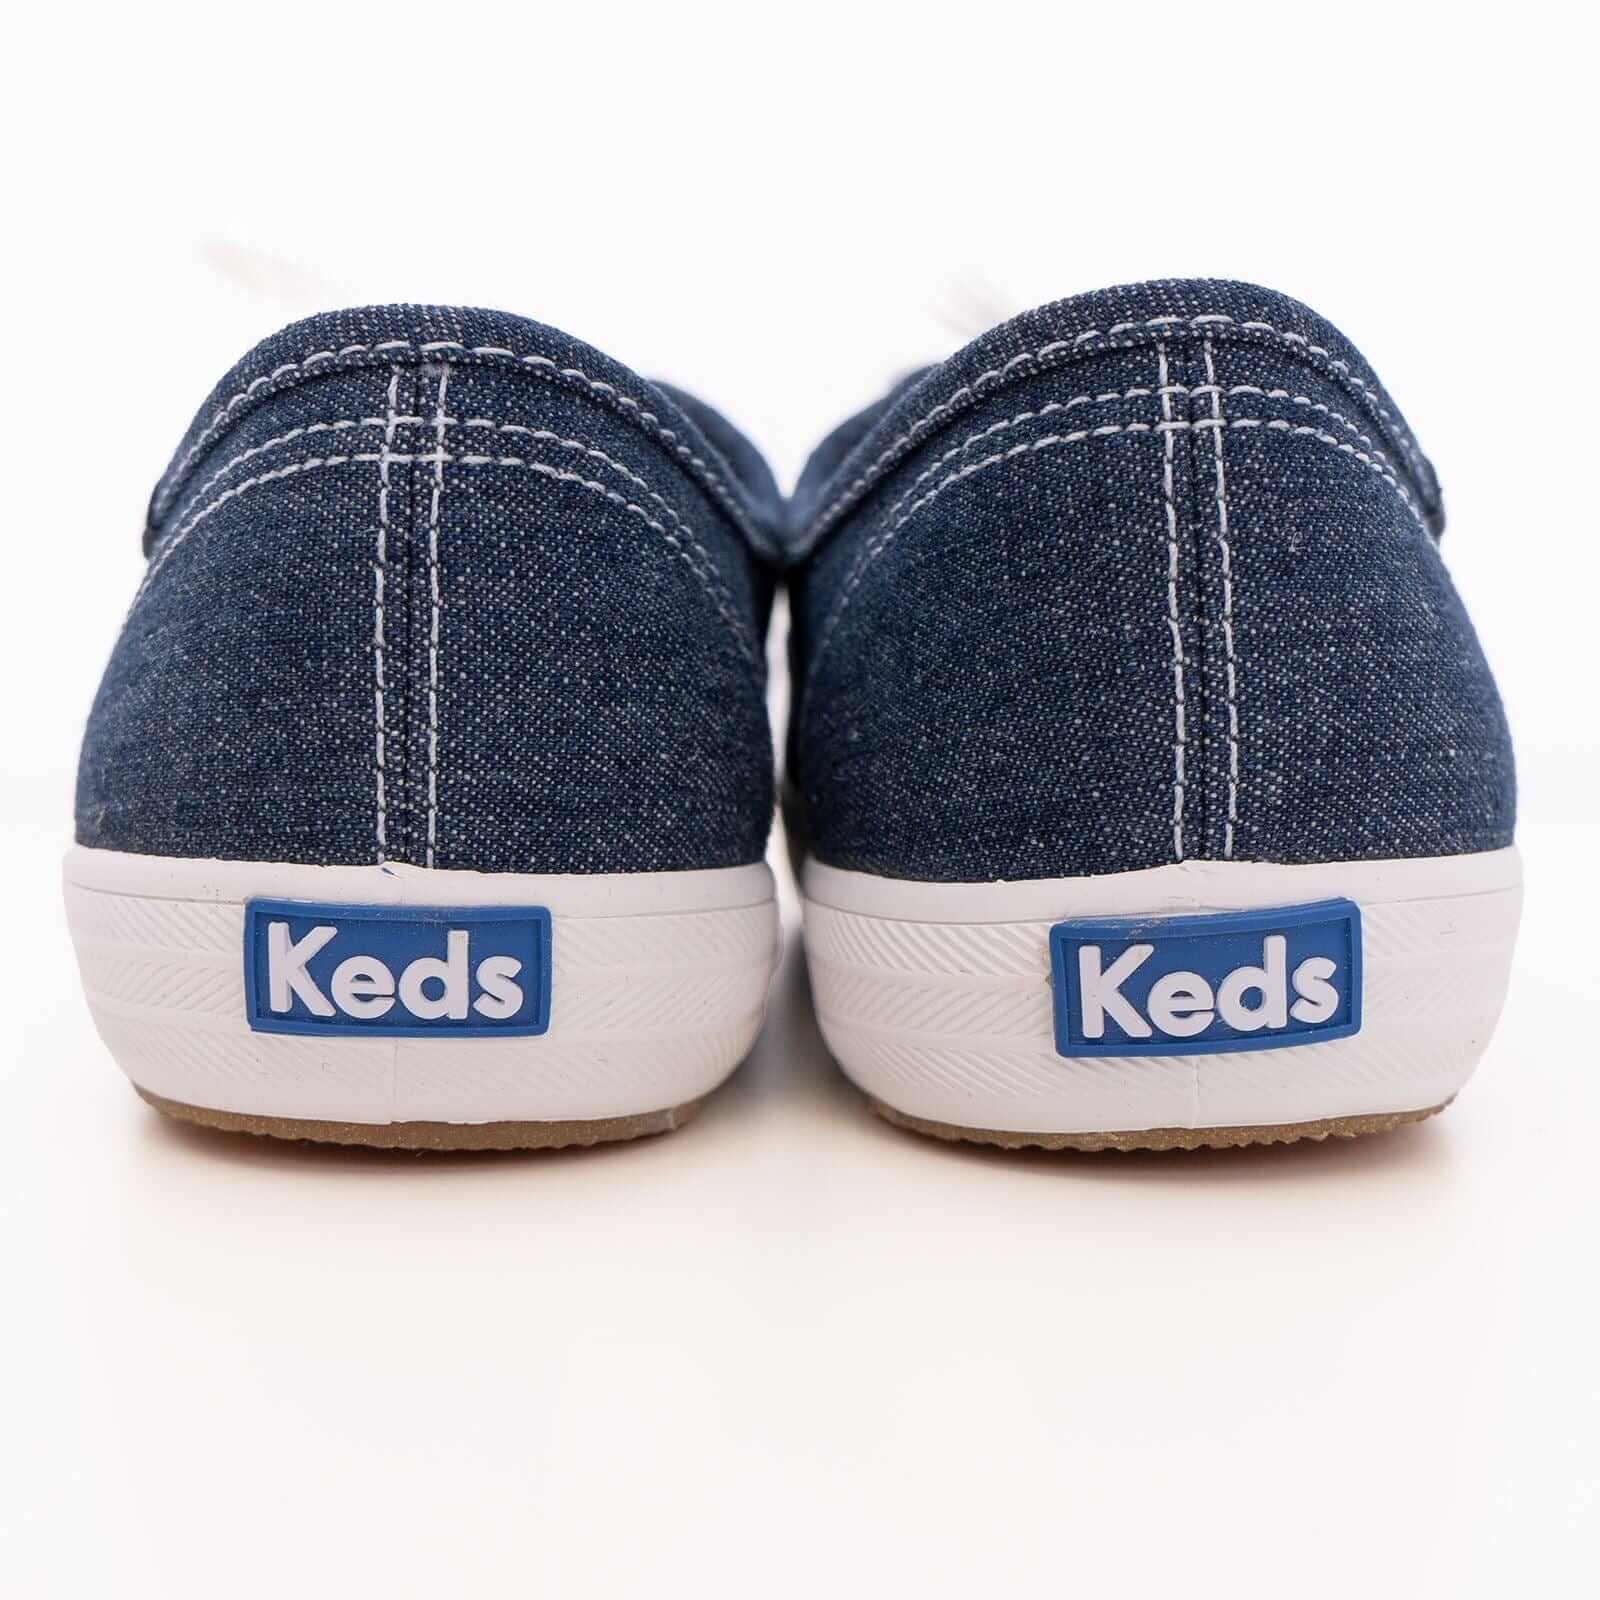 Keds Eco Blue Denim Canvas Lightweight Comfortable Trainers For Women - Blue - UK 3.5 - Sustainable Everyday Sneakers